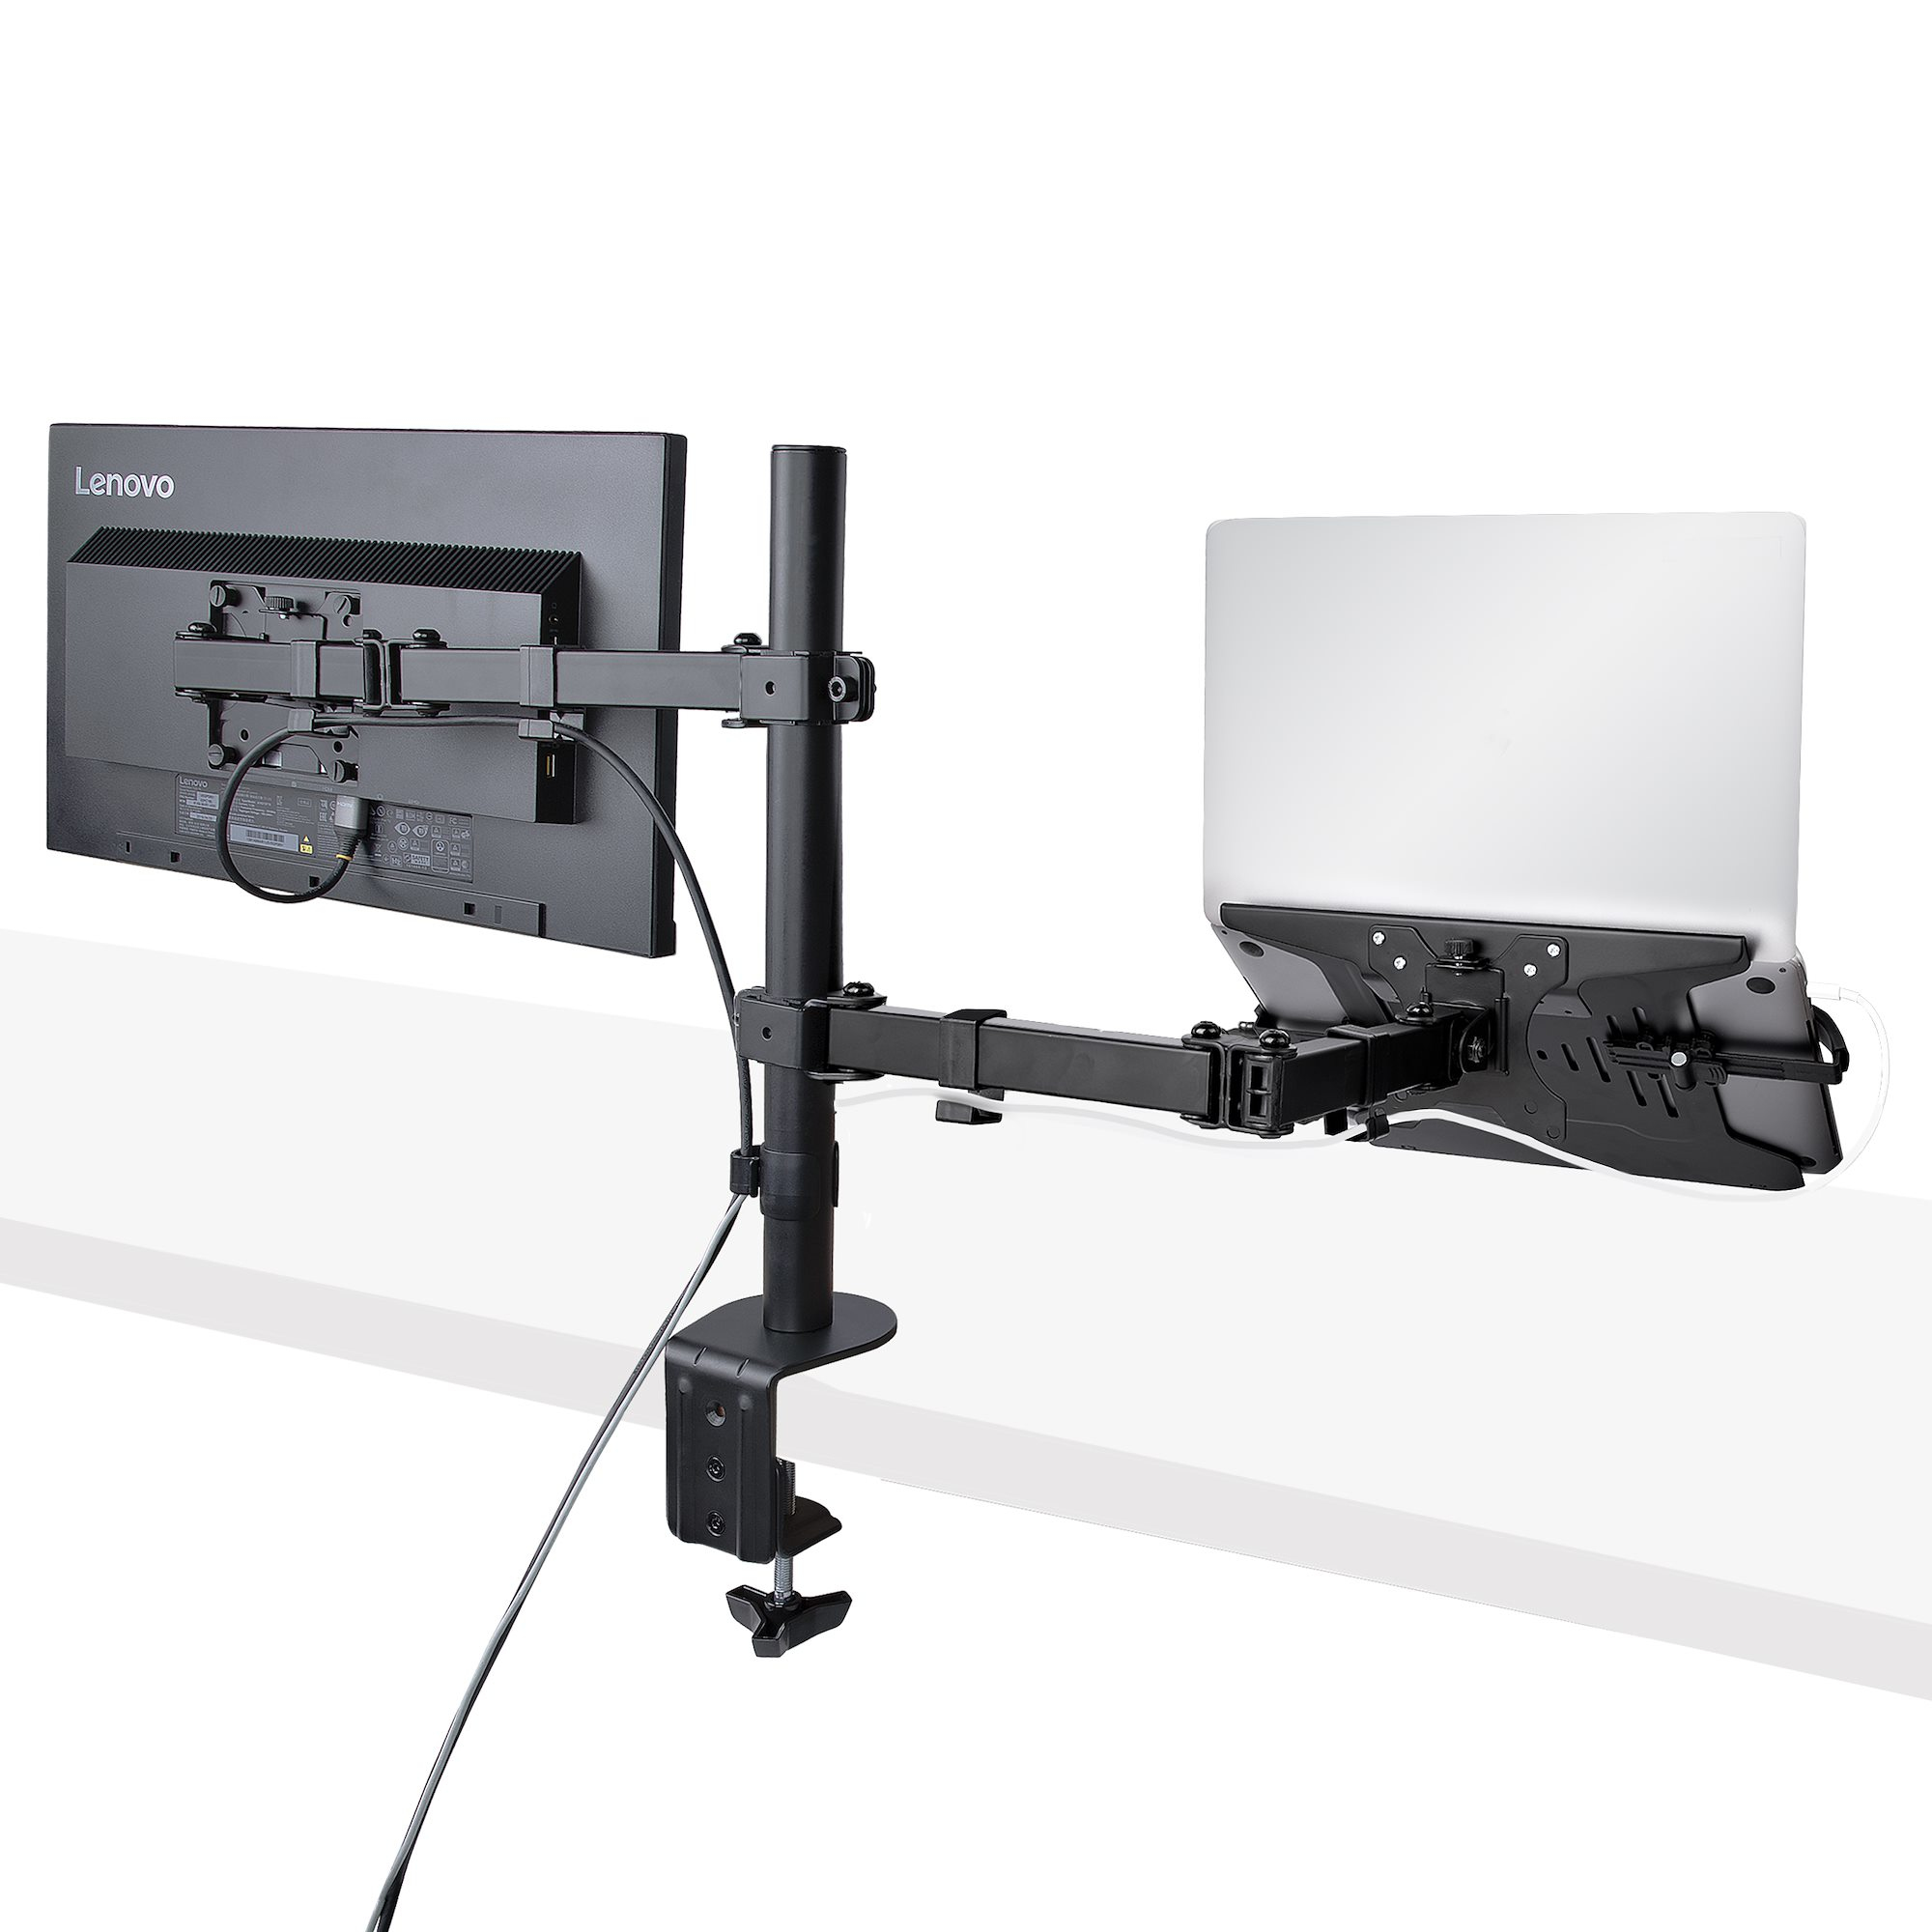 StarTech.com A2-LAPTOP-DESK-MOUNT  StarTech.com Monitor Arm with VESA  Laptop Tray, For a Laptop (4.5kg/9.9lb) and a Single Display up to 32  (8kg/17.6lb), Black, Vented Tray, Adjustable Laptop Arm Mount,  C-clamp/Grommet Mount